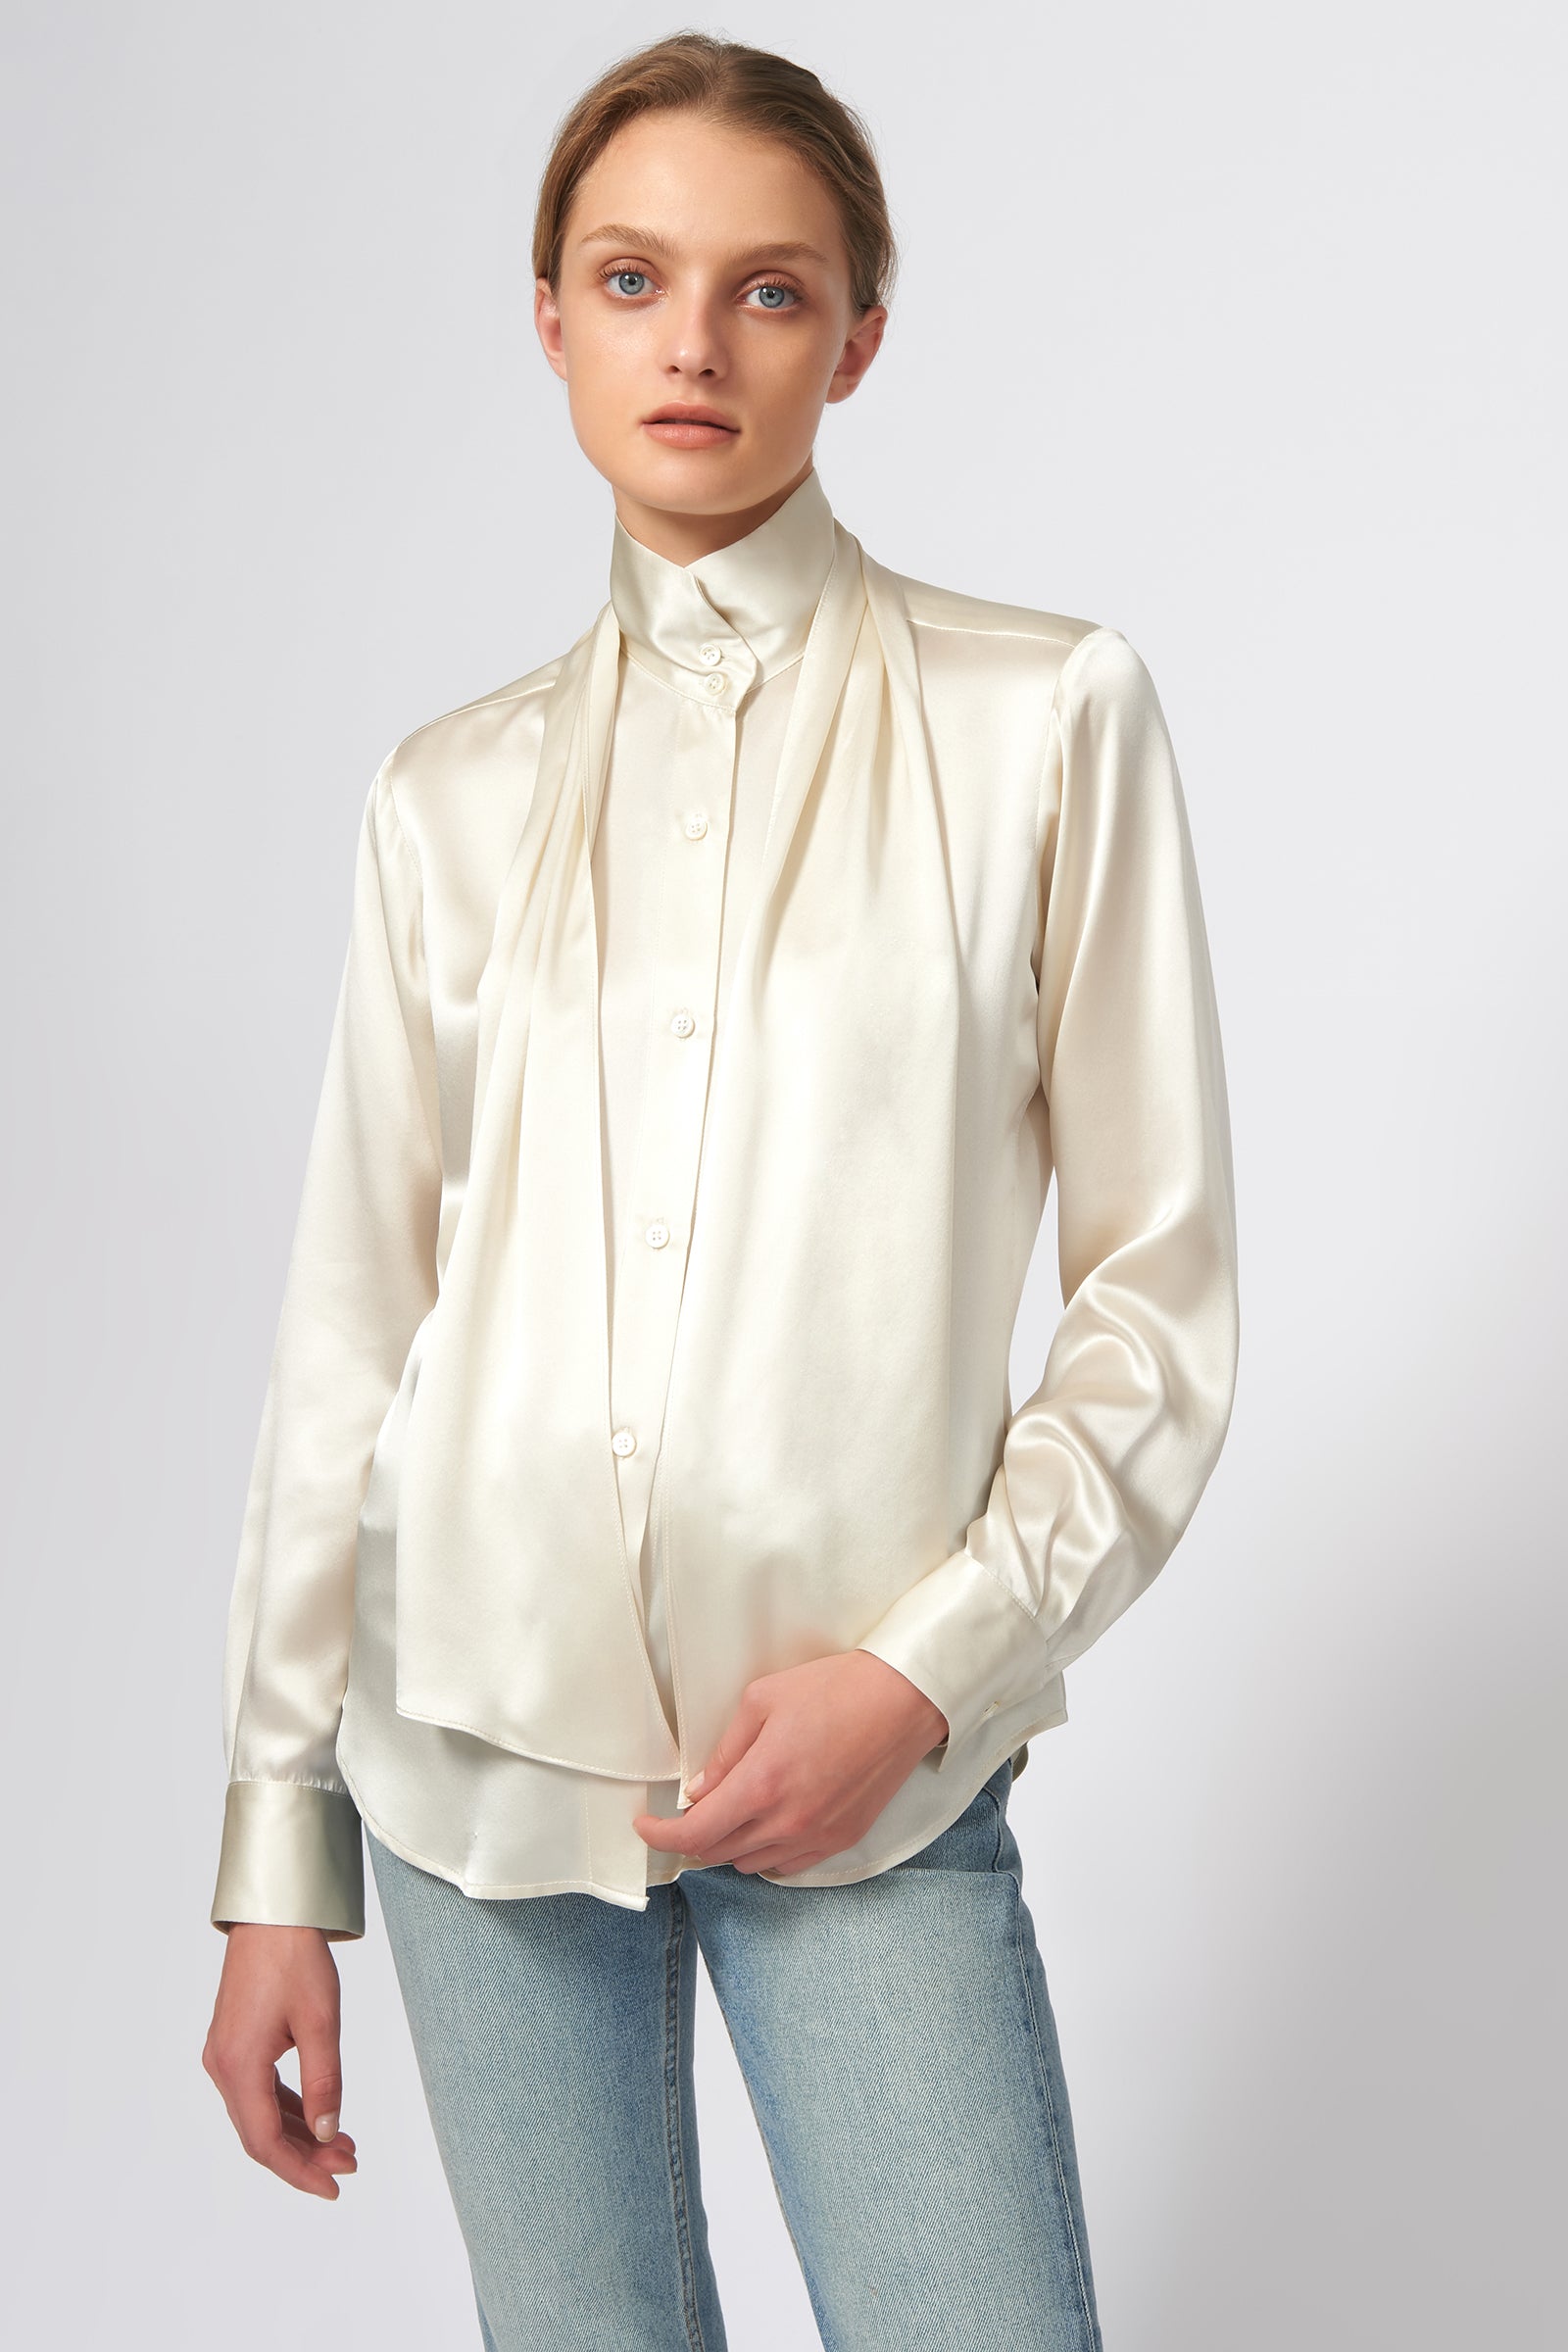 Scarf Tie Blouse in Oyster Made From 100% Silk – KAL RIEMAN